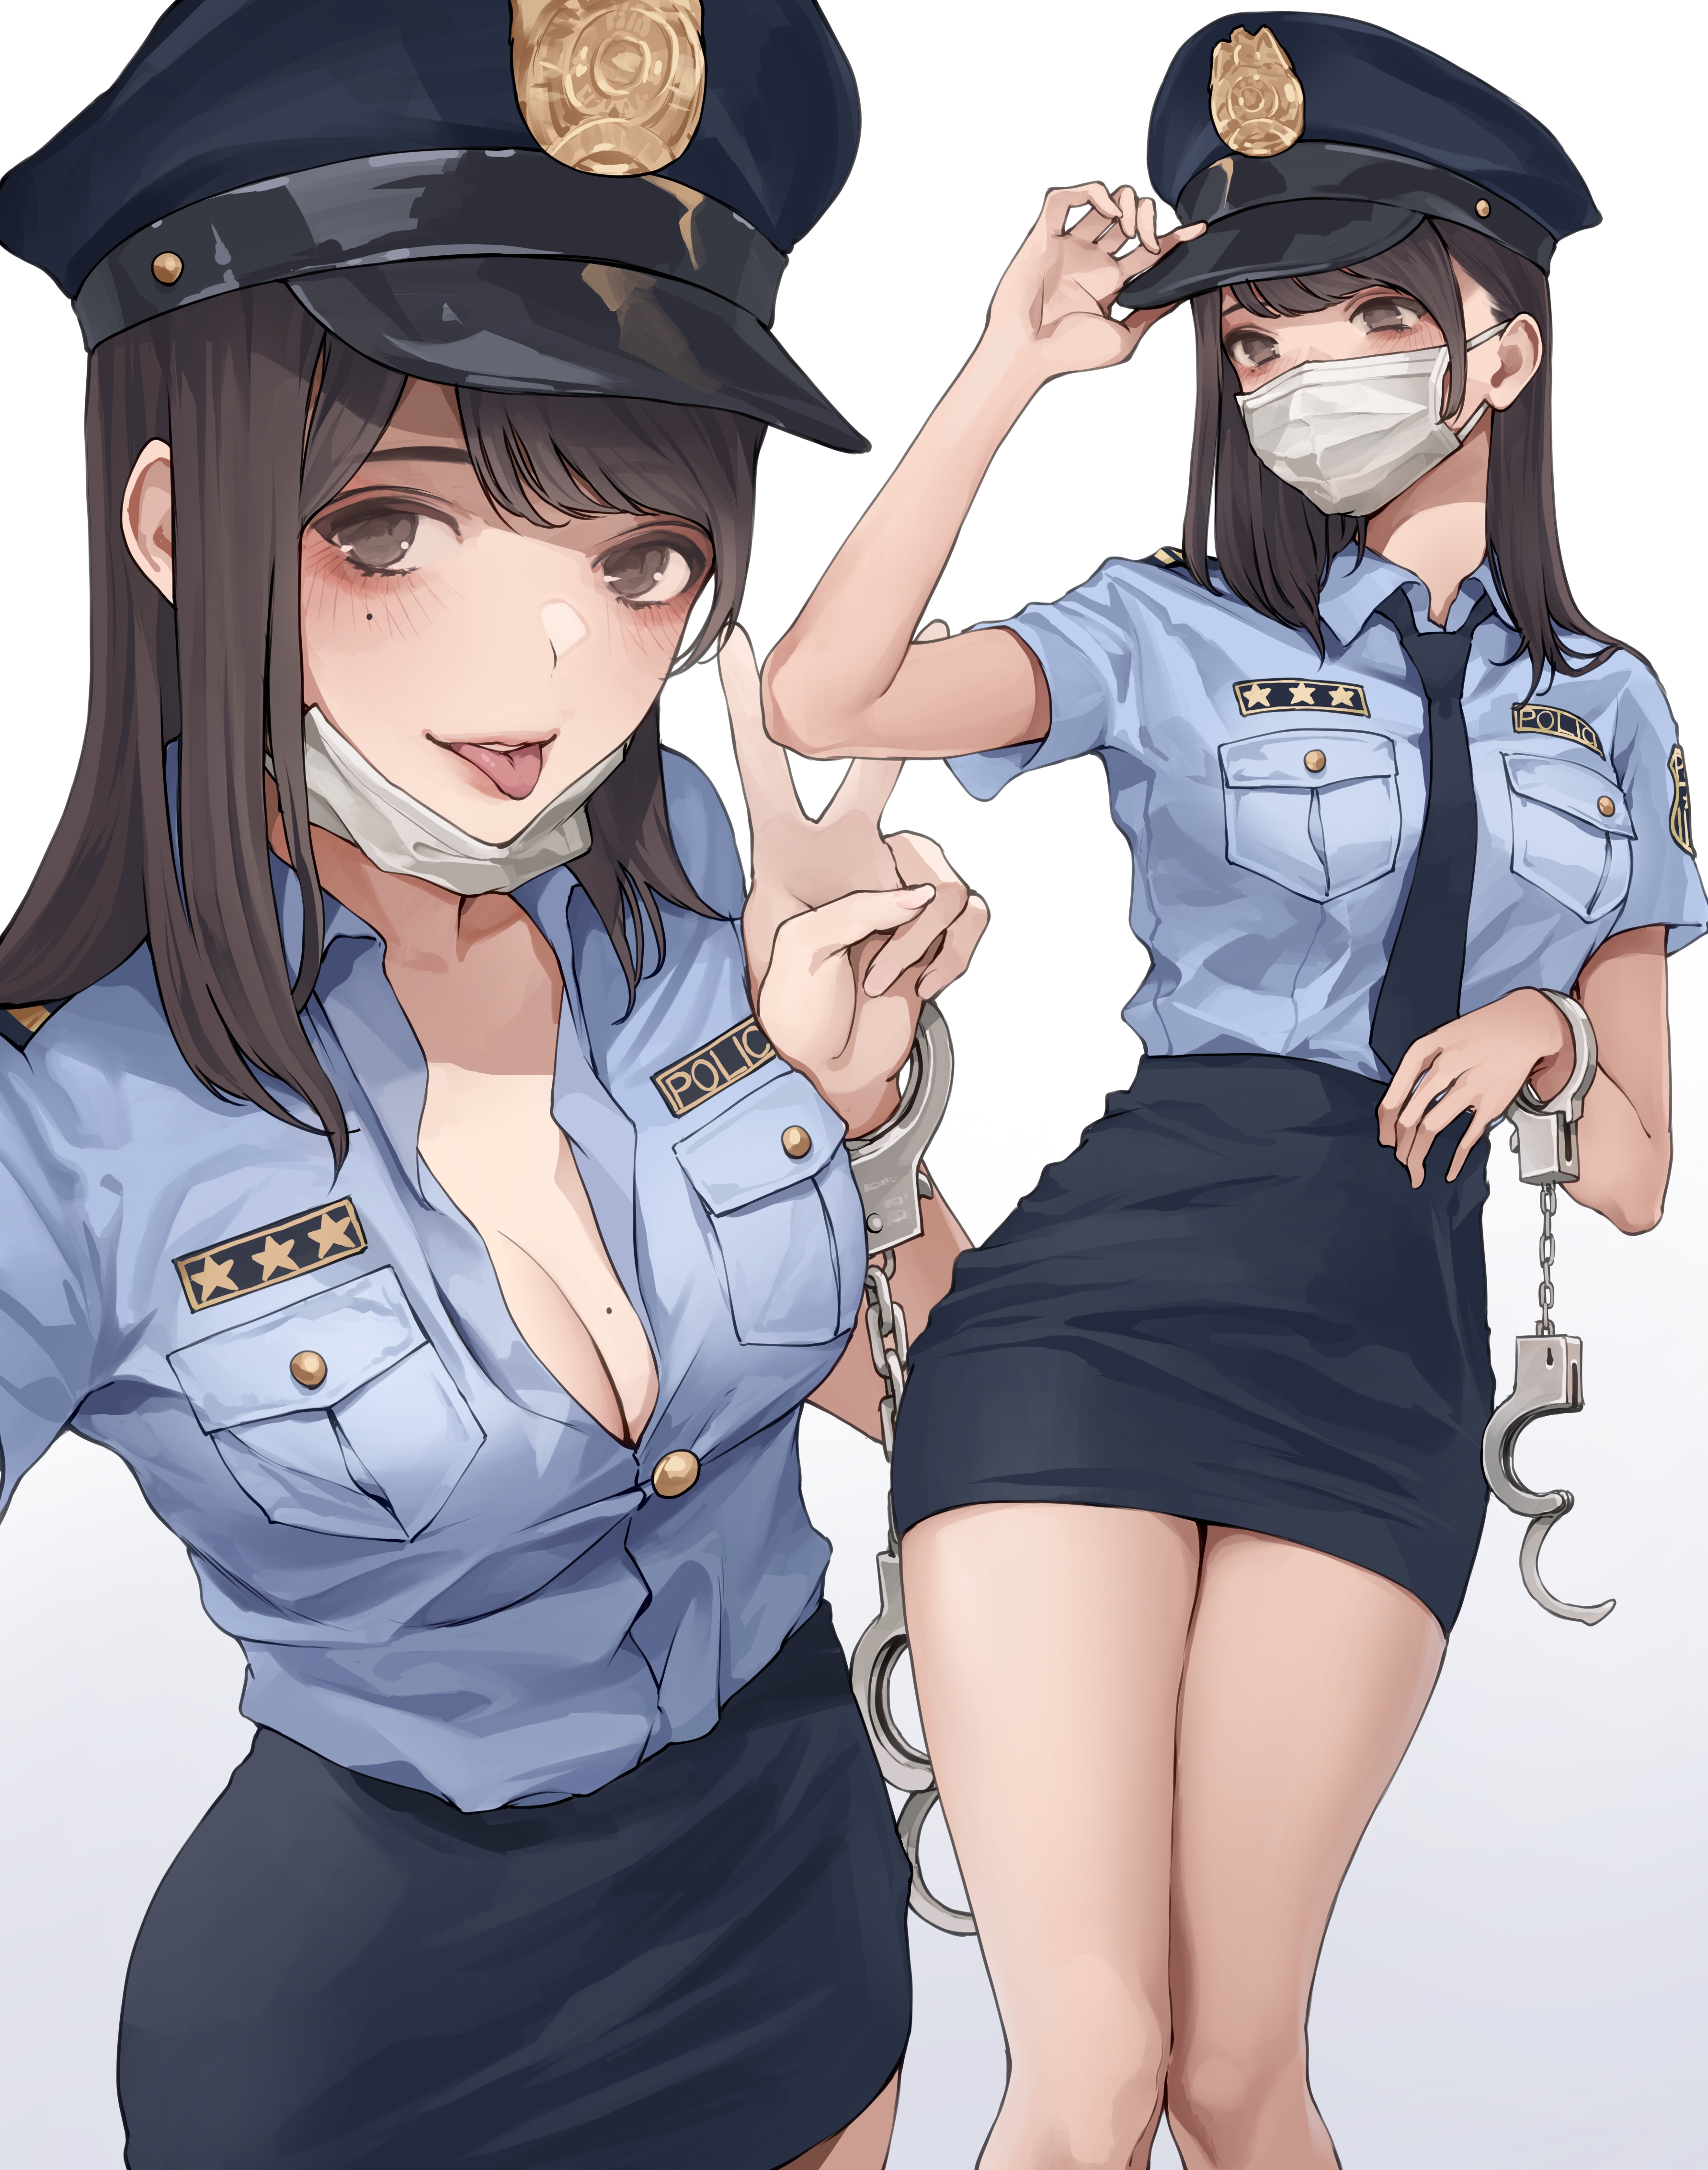 Anime 3566x4531 original characters anime anime girls police women 2D artwork drawing koh portrait display tongue out mask hat moles mole under eye cleavage peace sign handcuffs tie brunette mole on breast legs police hat police